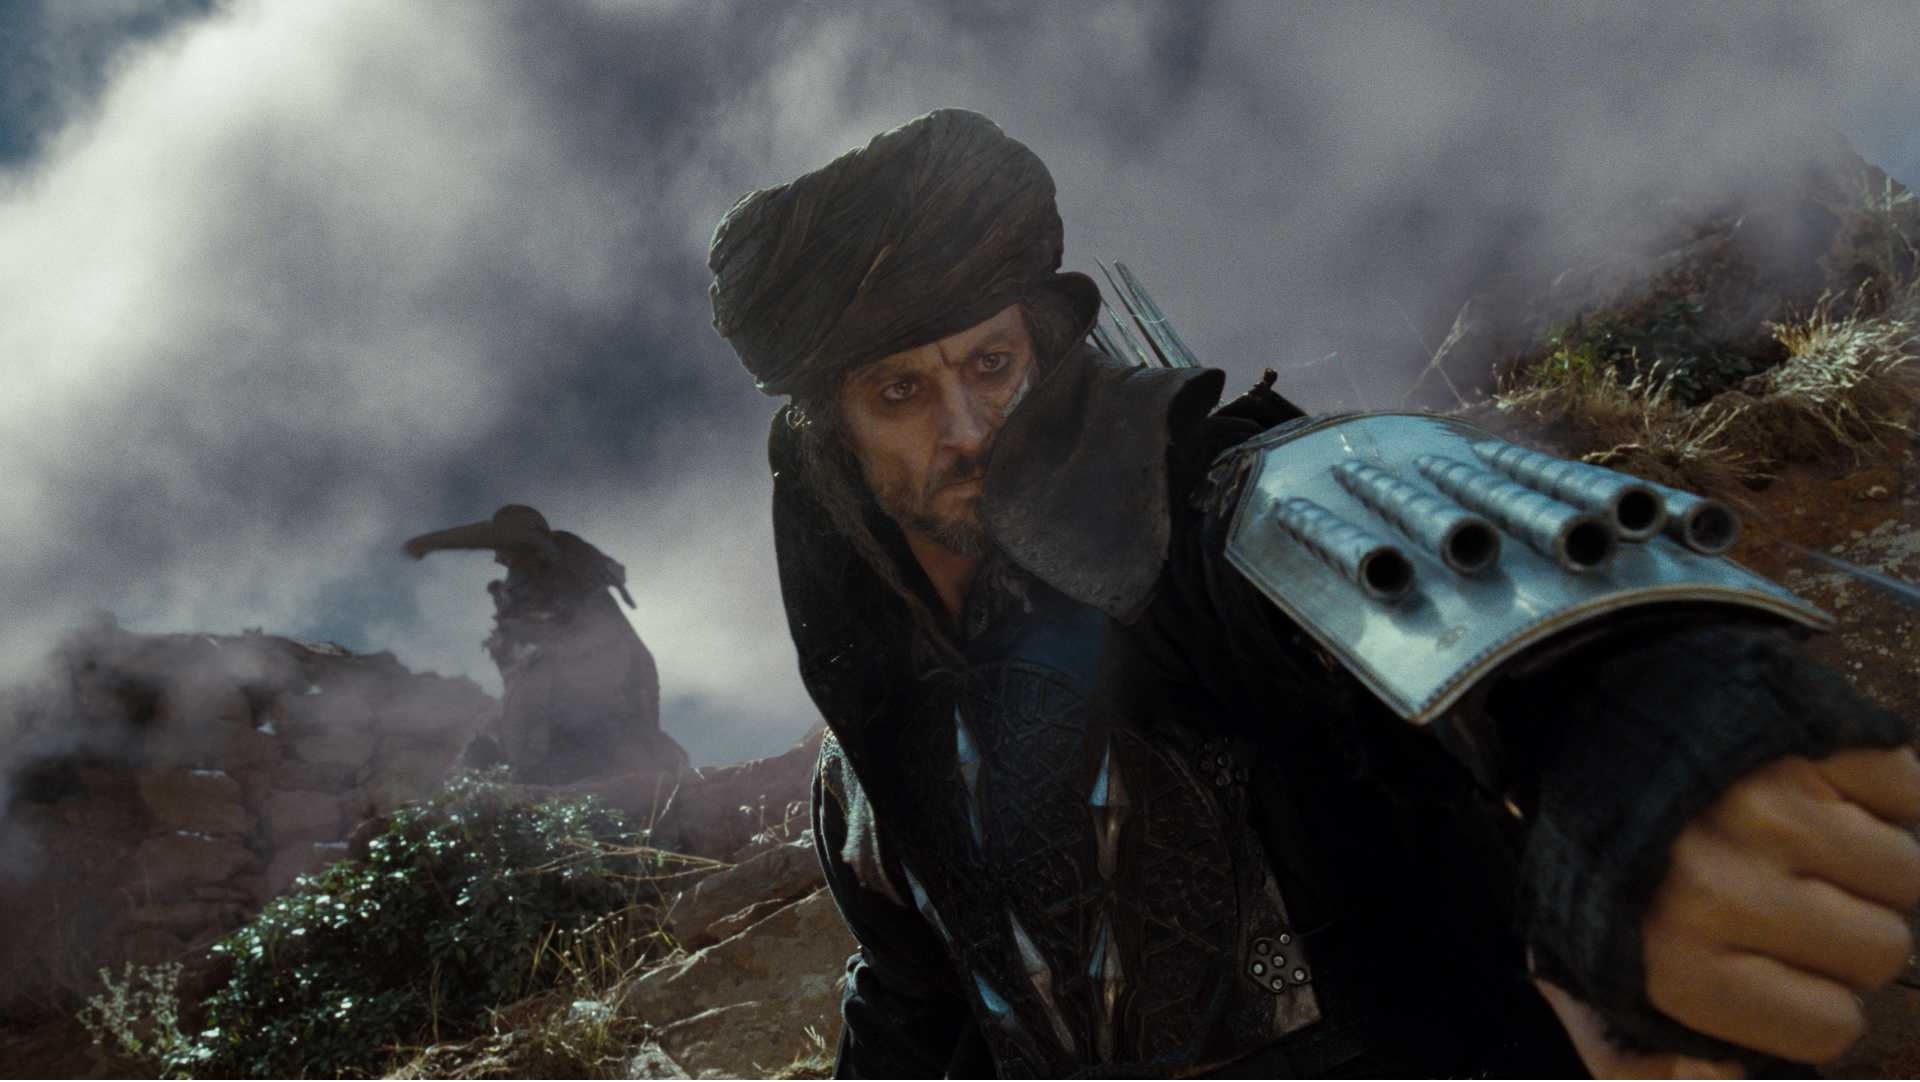 Movie review - 'Prince of Persia' puts great stars in repetitive story